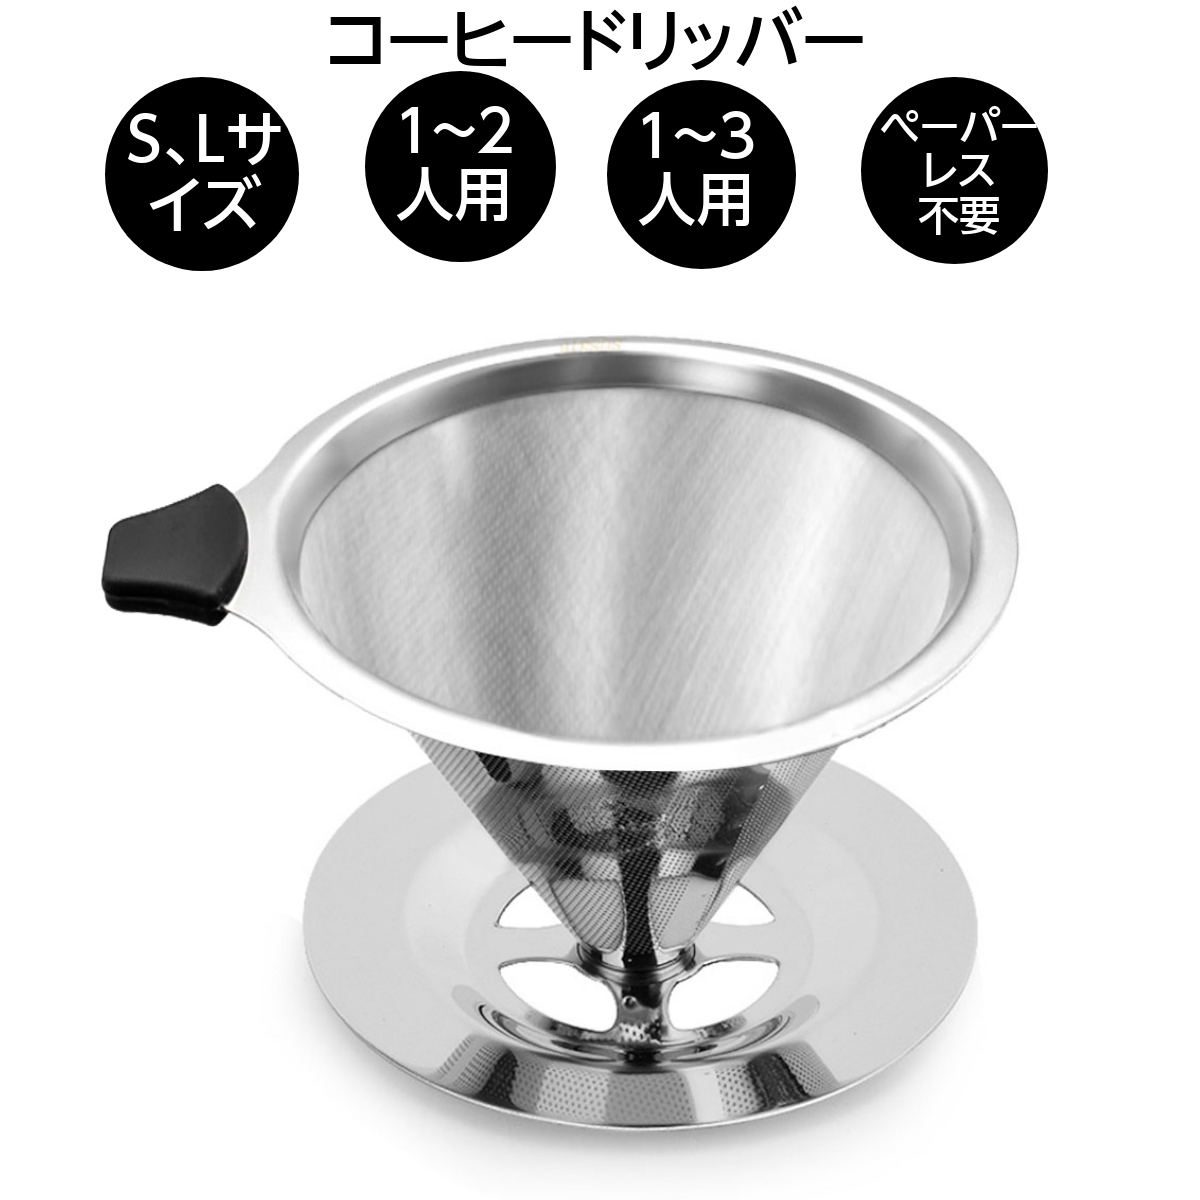  coffee dripper paper less un- necessary stainless steel coffee drip coffee filter paper un- necessary outdoor stainless steel dishwasher correspondence 1-4 cup for 